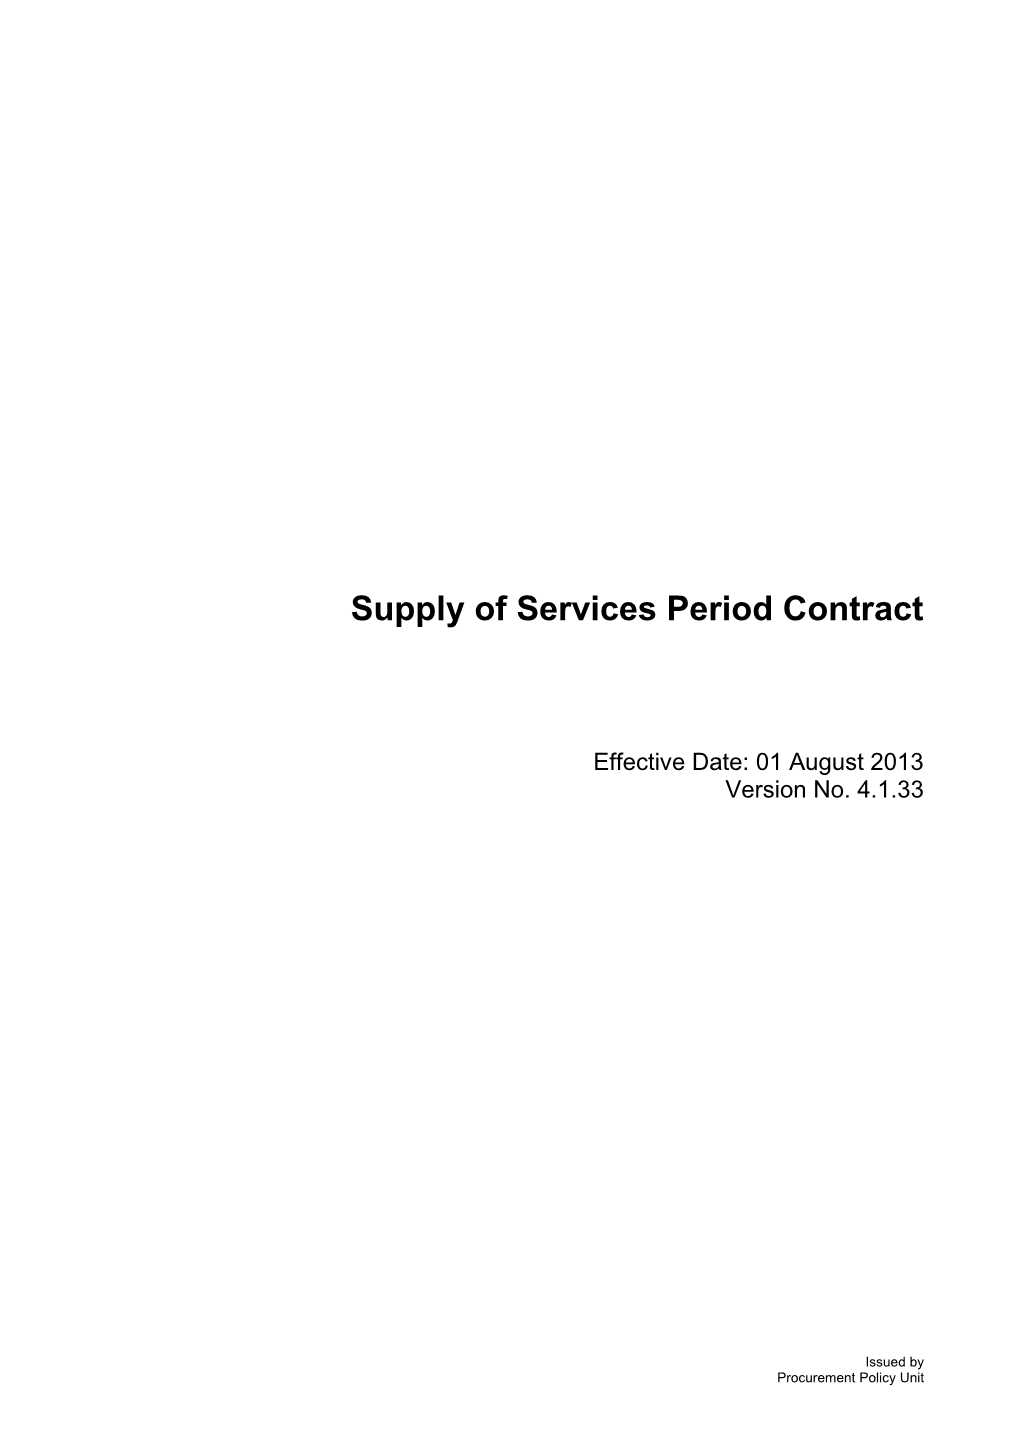 Supply of Services Period - V 4.1.33 (01 August 2013)